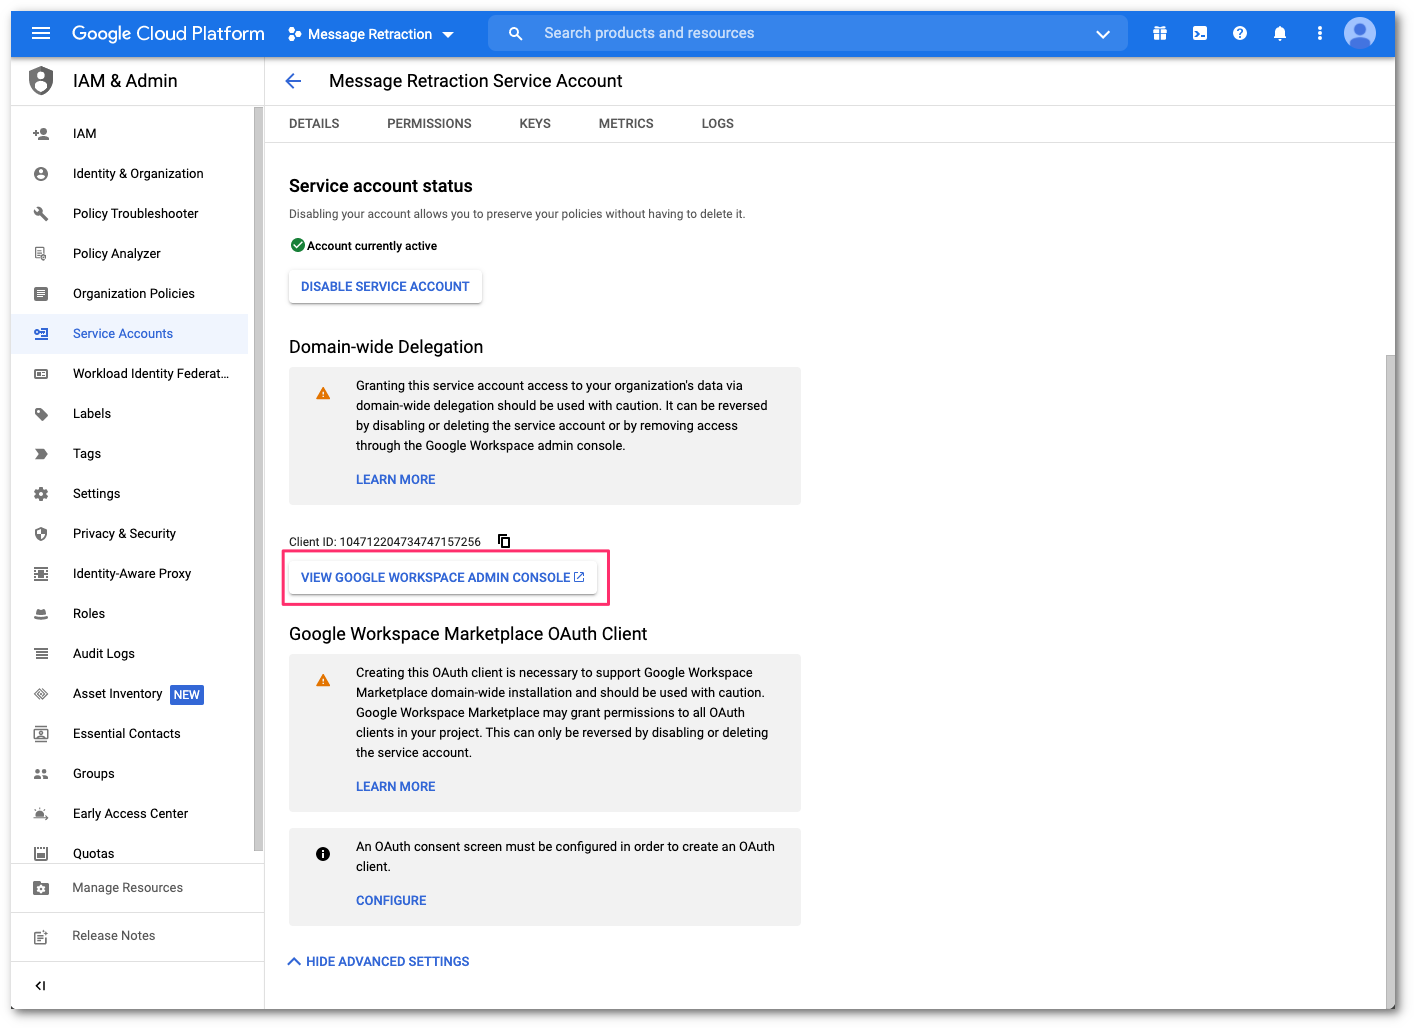 Select View Google Workspace Admin Console to configure the domain-wide delegation